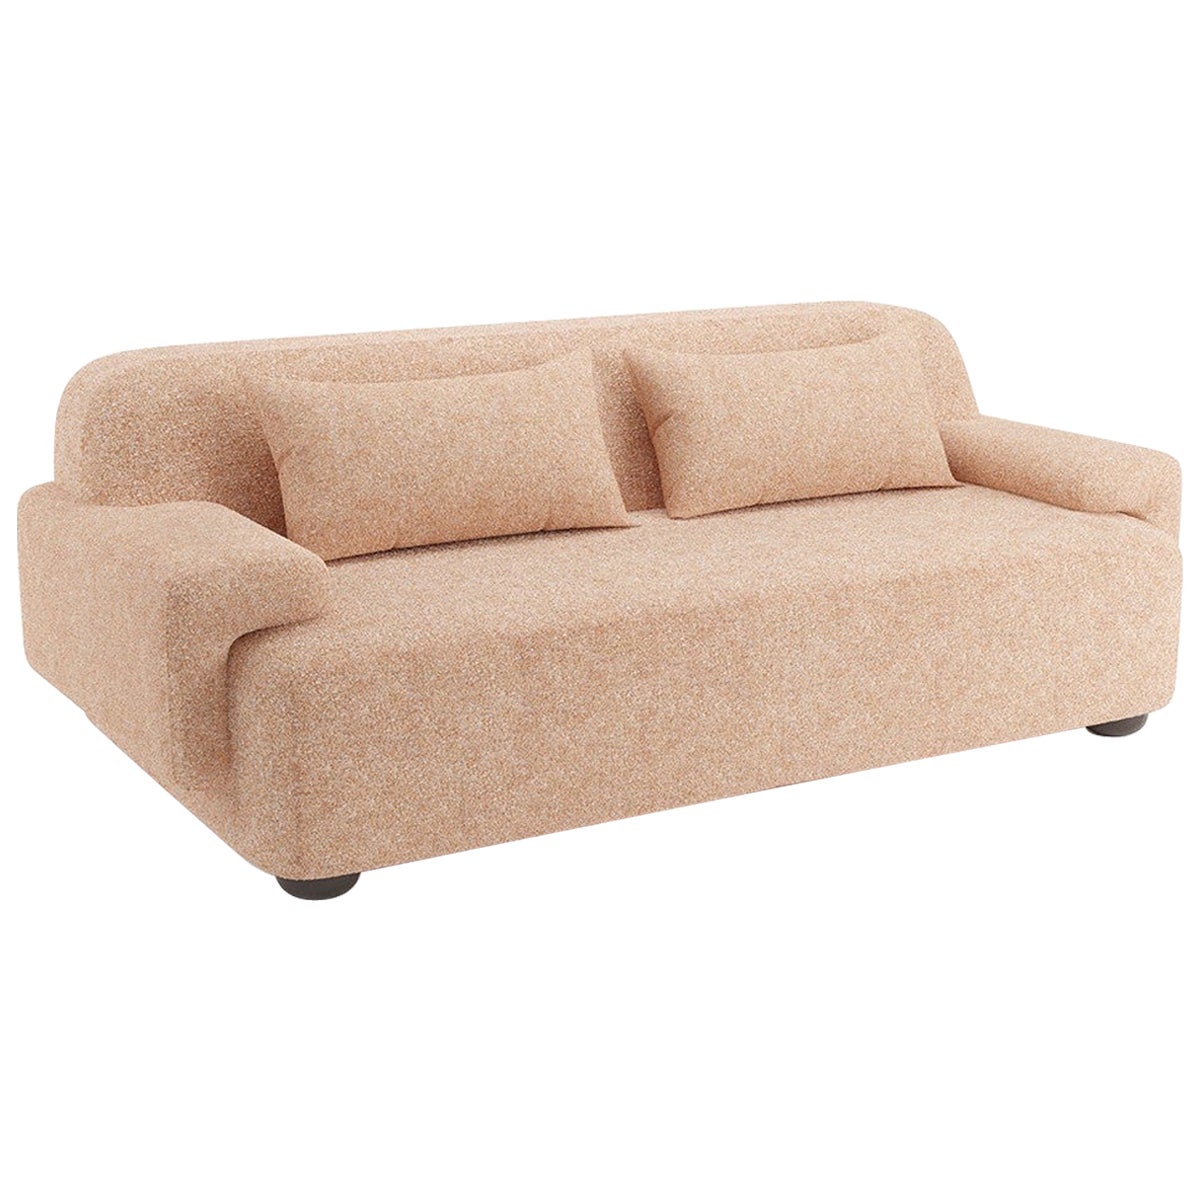 Popus Editions Lena 4 Seater Sofa in Nude Antwerp Linen Upholstery